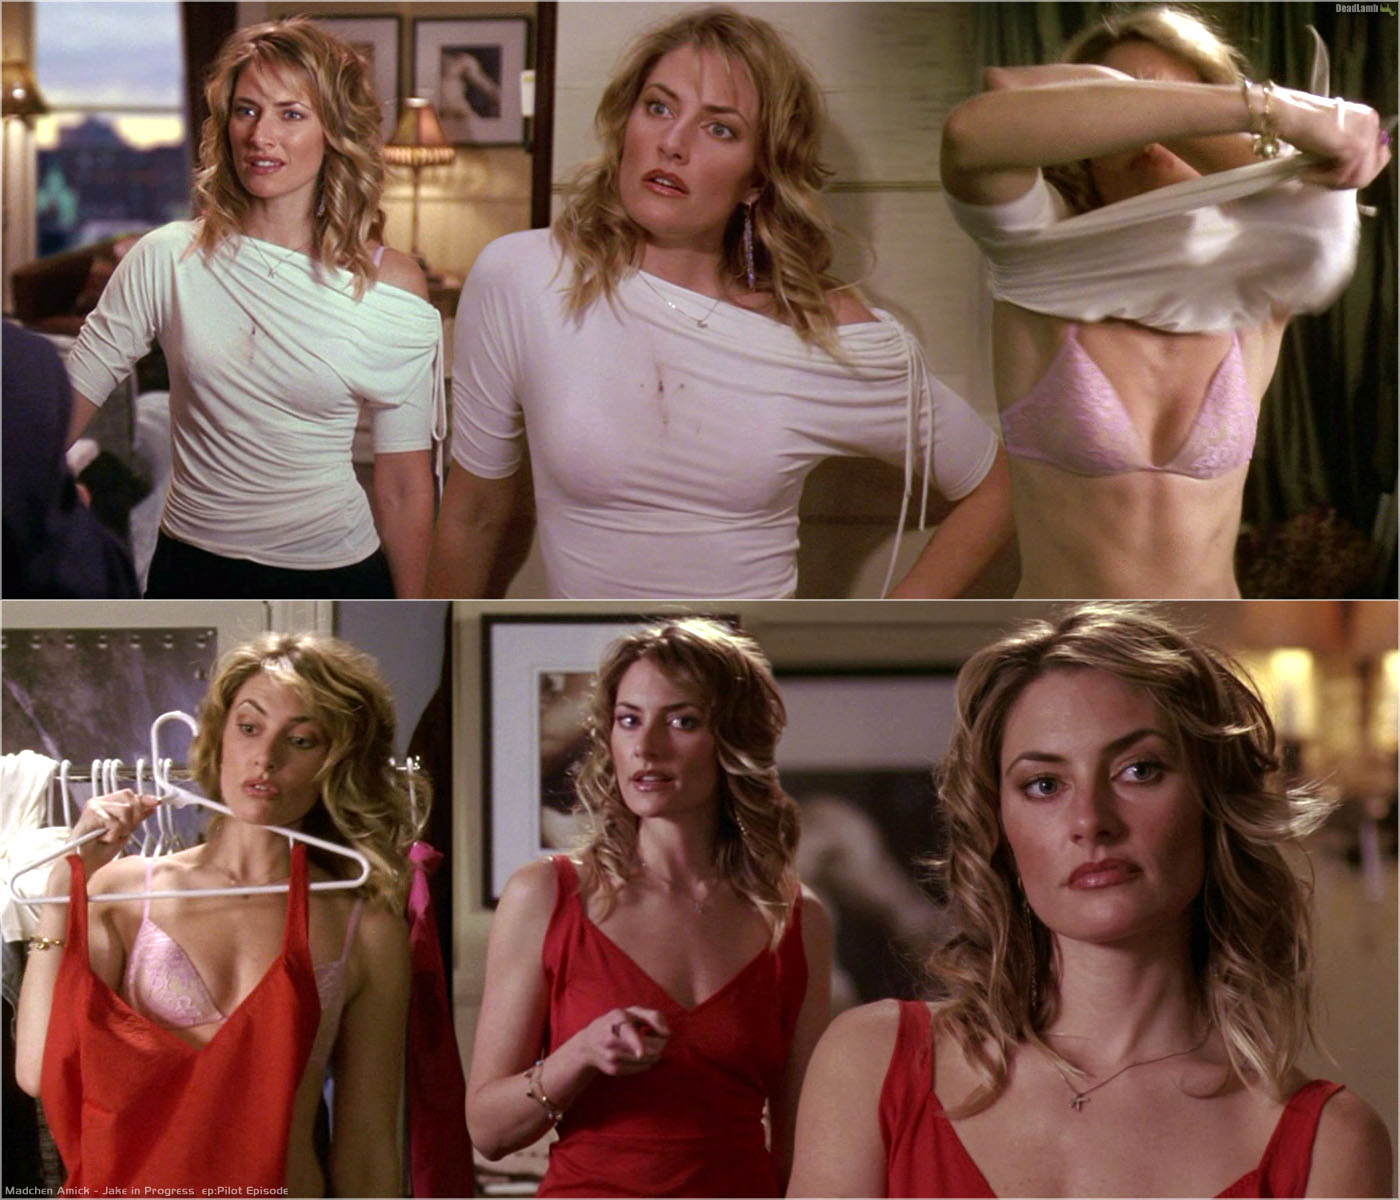 Mг¤dchen amick topless